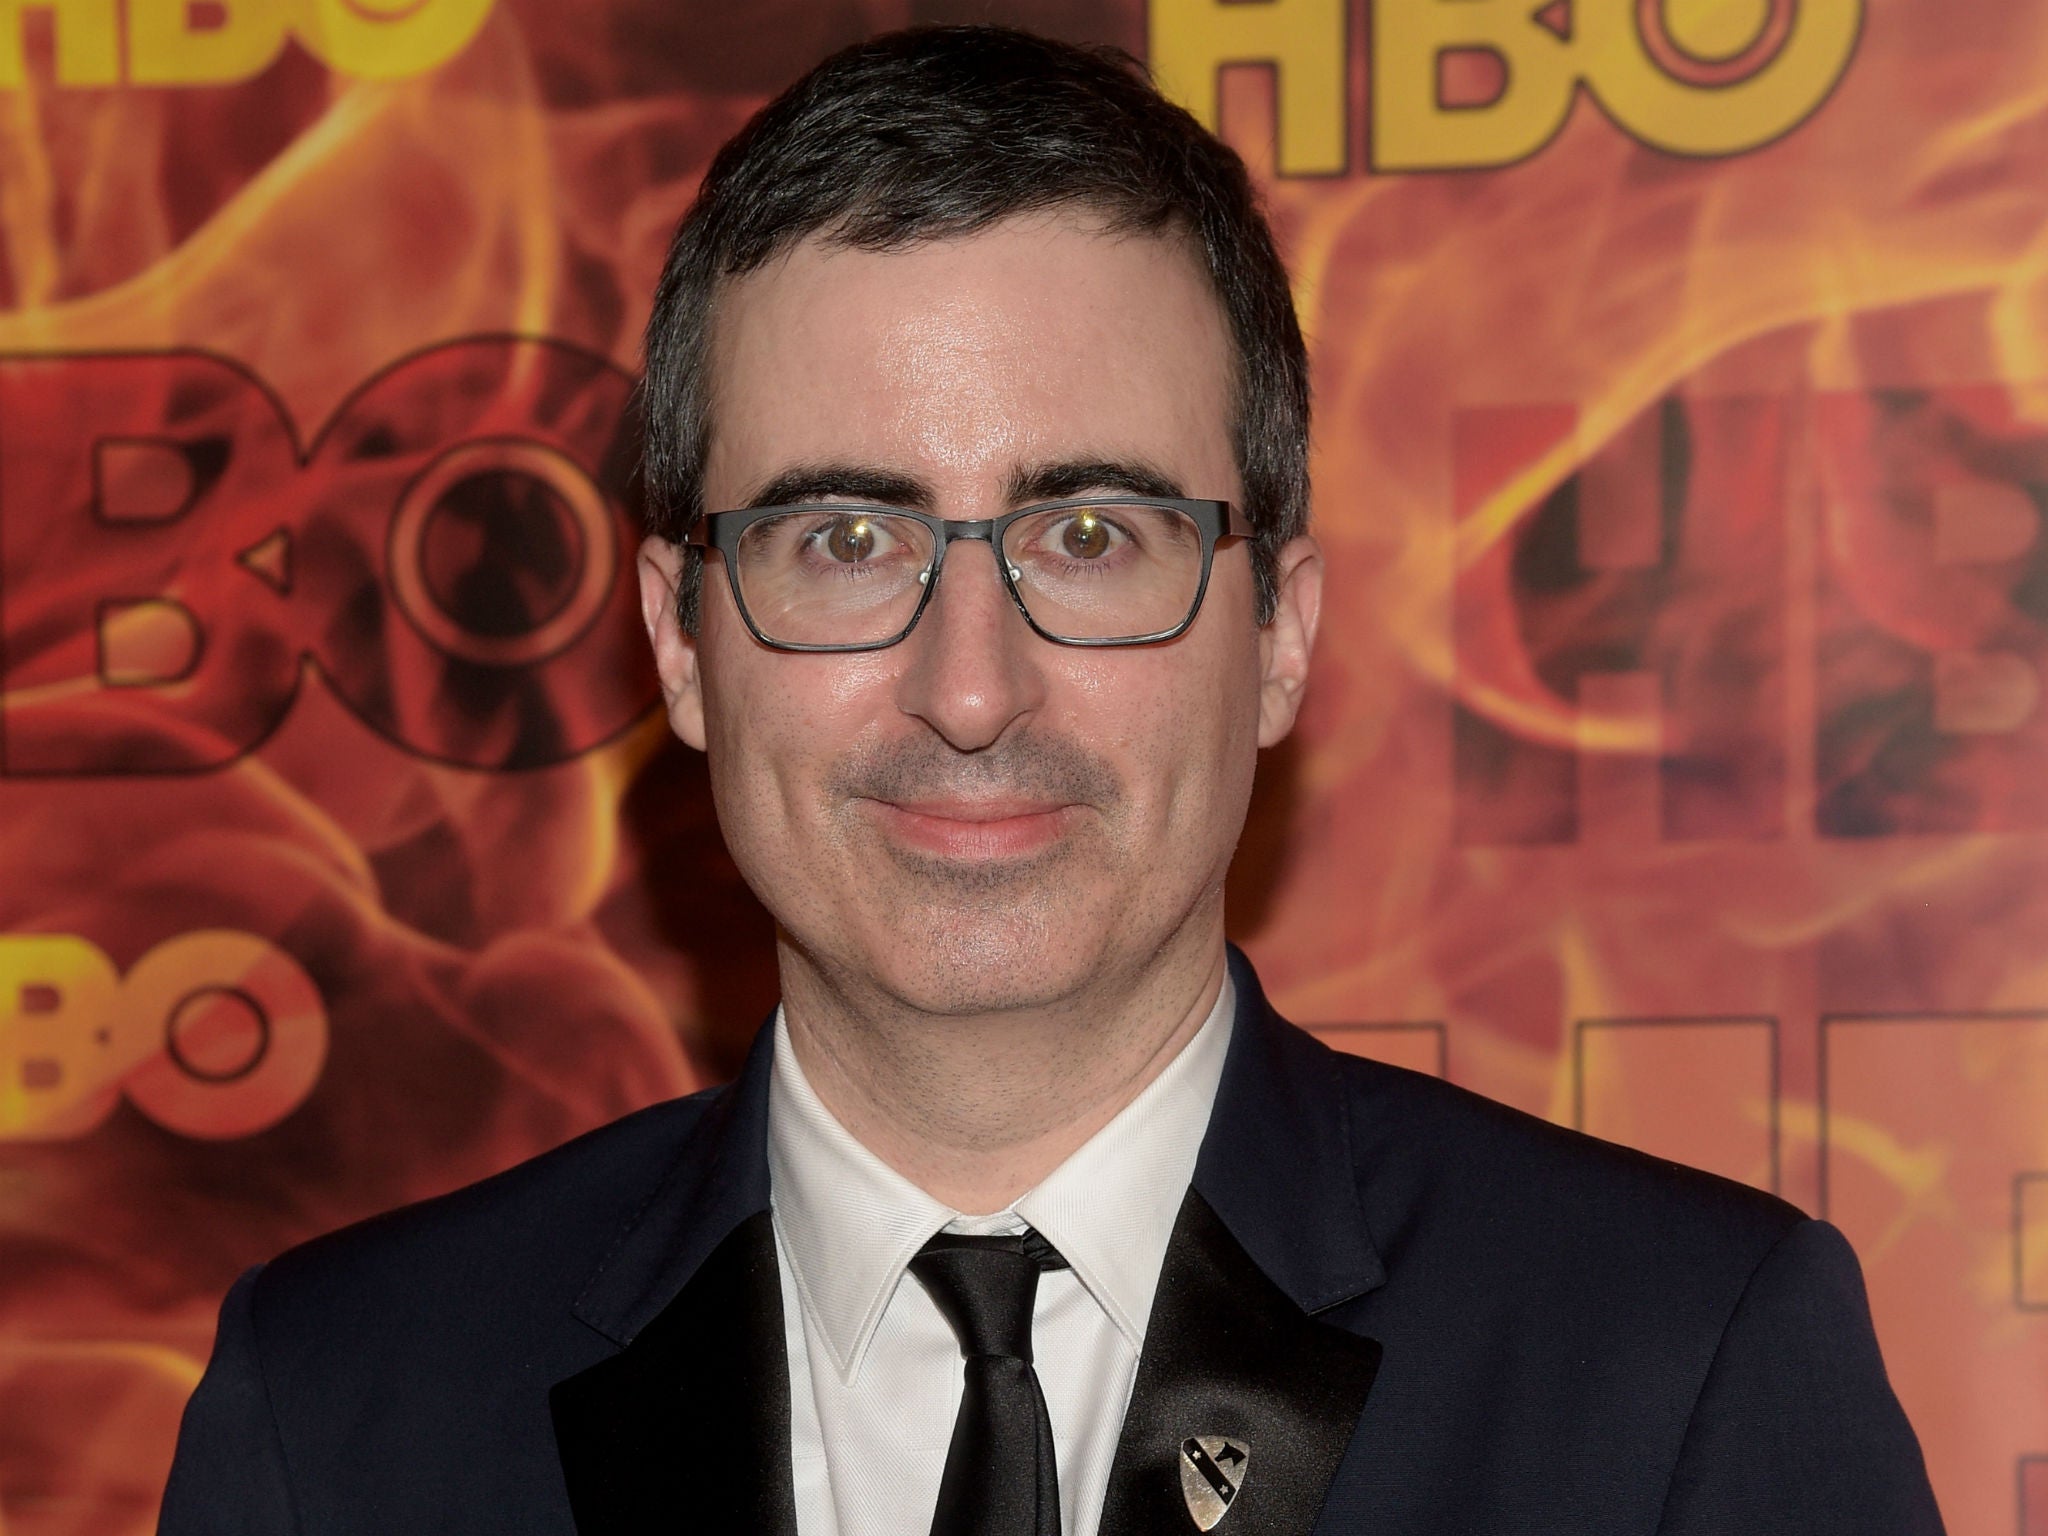 John Oliver has debunked a viral Facebook status with his own viral Facebook video